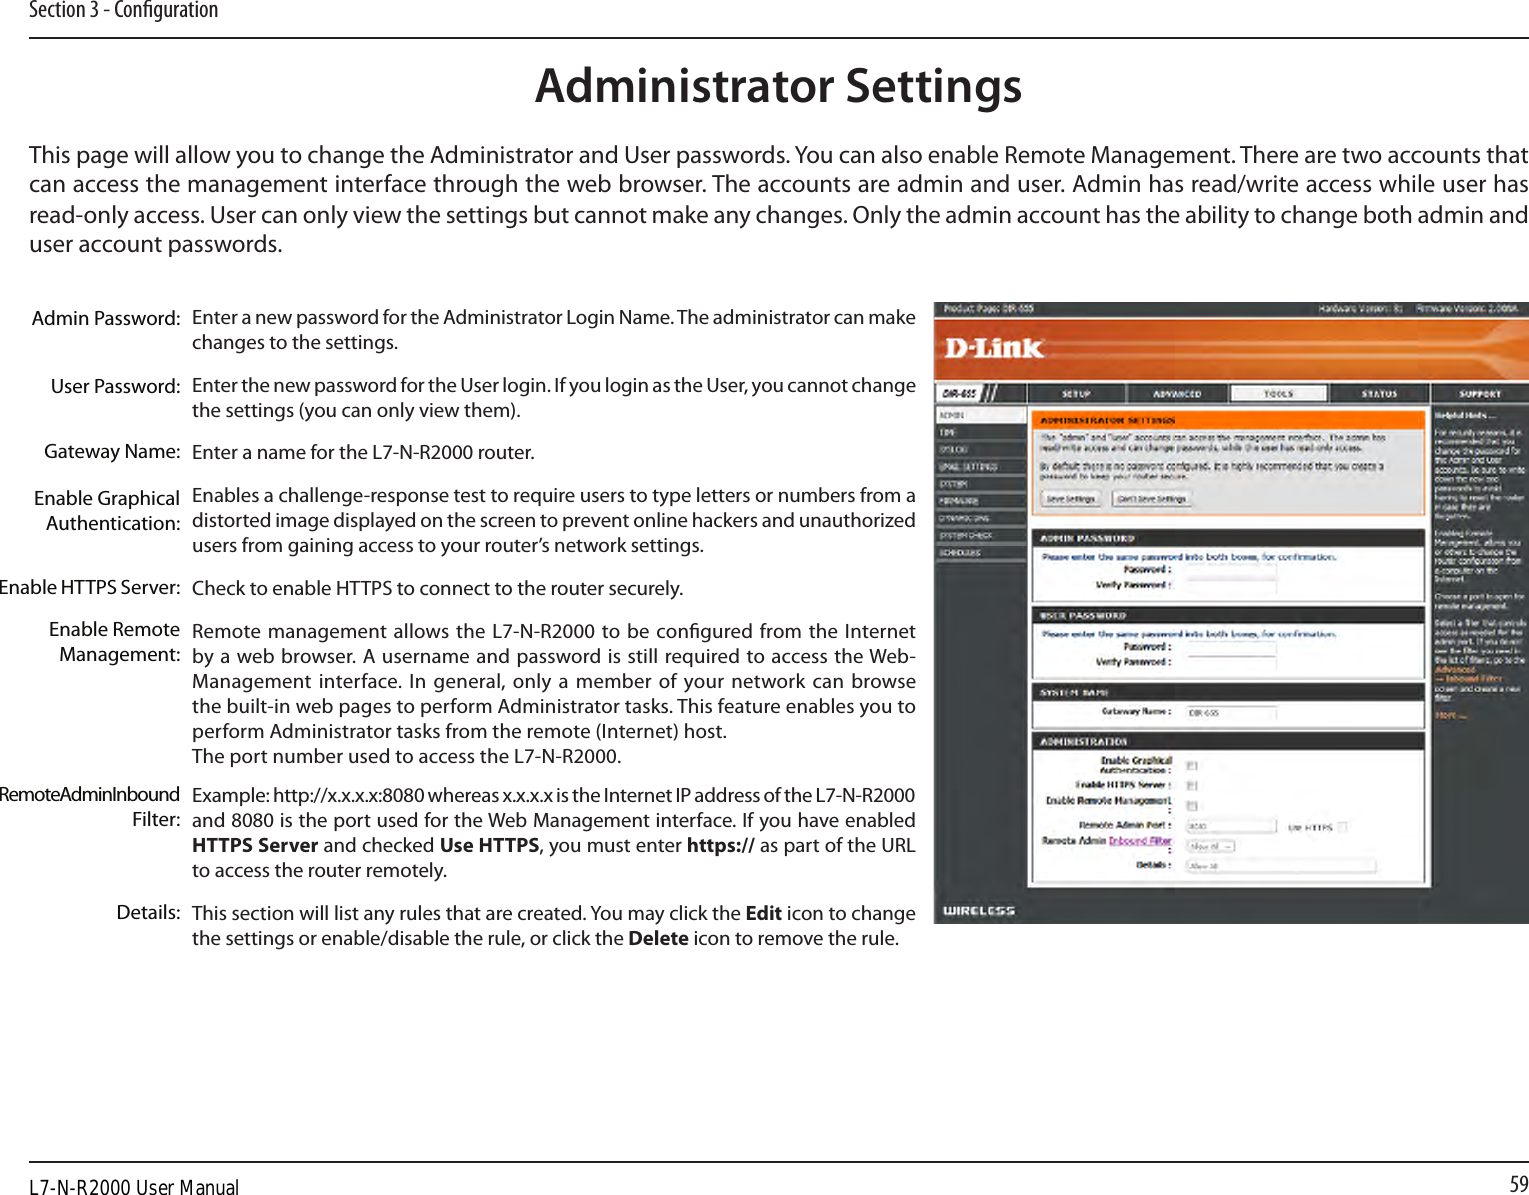 59Section 3 - CongurationAdministrator SettingsThis page will allow you to change the Administrator and User passwords. You can also enable Remote Management. There are two accounts that can access the management interface through the web browser. The accounts are admin and user. Admin has read/write access while user has read-only access. User can only view the settings but cannot make any changes. Only the admin account has the ability to change both admin and user account passwords.Enter a new password for the Administrator Login Name. The administrator can make changes to the settings.Enter the new password for the User login. If you login as the User, you cannot change the settings (you can only view them).Enter a name for the L7-N-R2000 router.Enables a challenge-response test to require users to type letters or numbers from a distorted image displayed on the screen to prevent online hackers and unauthorized users from gaining access to your router’s network settings.Check to enable HTTPS to connect to the router securely.Remote management allows the L7-N-R2000 to be congured from the  Internet by a web browser. A username and password is still required to access the Web-Management interface. In general, only  a  member of your  network can browse the built-in web pages to perform Administrator tasks. This feature enables you to perform Administrator tasks from the remote (Internet) host.The port number used to access the L7-N-R2000.Example: http://x.x.x.x:8080 whereas x.x.x.x is the Internet IP address of the L7-N-R2000 and 8080 is the port used for the Web Management interface. If you have enabled HTTPS Server and checked Use HTTPS, you must enter https:// as part of the URL to access the router remotely.This section will list any rules that are created. You may click the Edit icon to change the settings or enable/disable the rule, or click the Delete icon to remove the rule.Admin Password:User Password:Gateway Name:Enable Graphical Authentication:Enable HTTPS Server:Enable Remote Management:Remote Admin Inbound Filter:Details:L7-N-R2000 User Manual